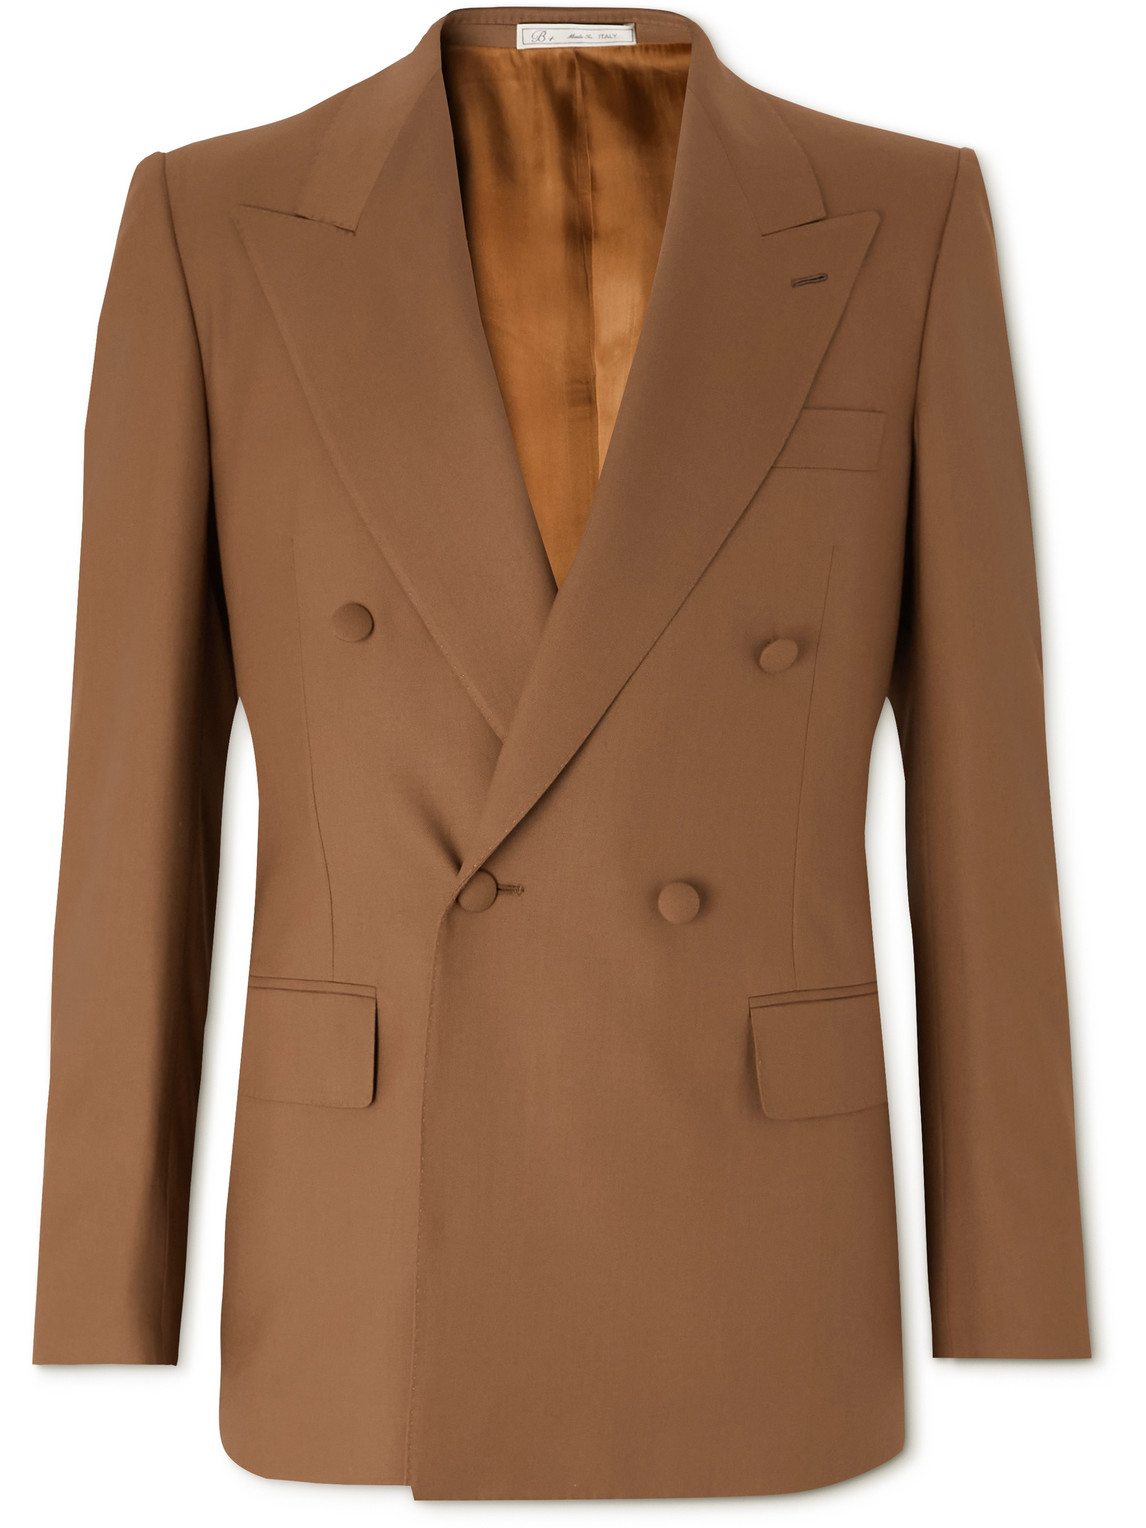 Umit Benan B+ Jacques Marie Mage Double-breasted Wool-twill Suit Jacket In Brown